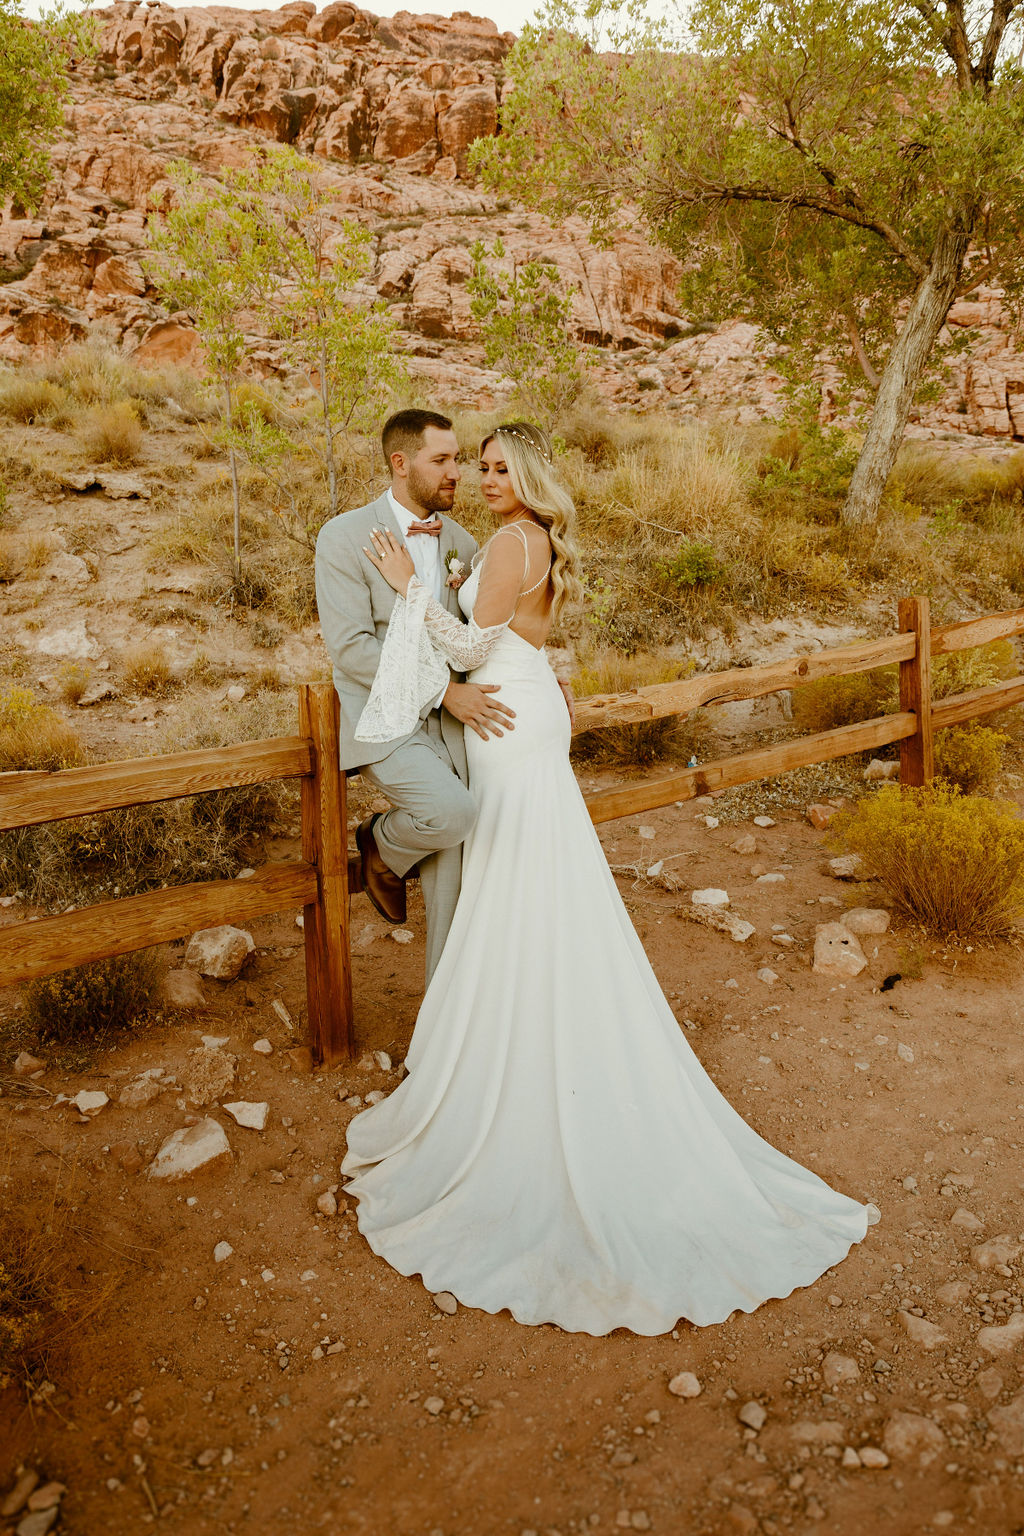 Red Rock Desert & Neon Vegas Lights. The groom posted on the wooden fence on the calico basin trail looking at the bride as she leans in to him placing her hand on his chest